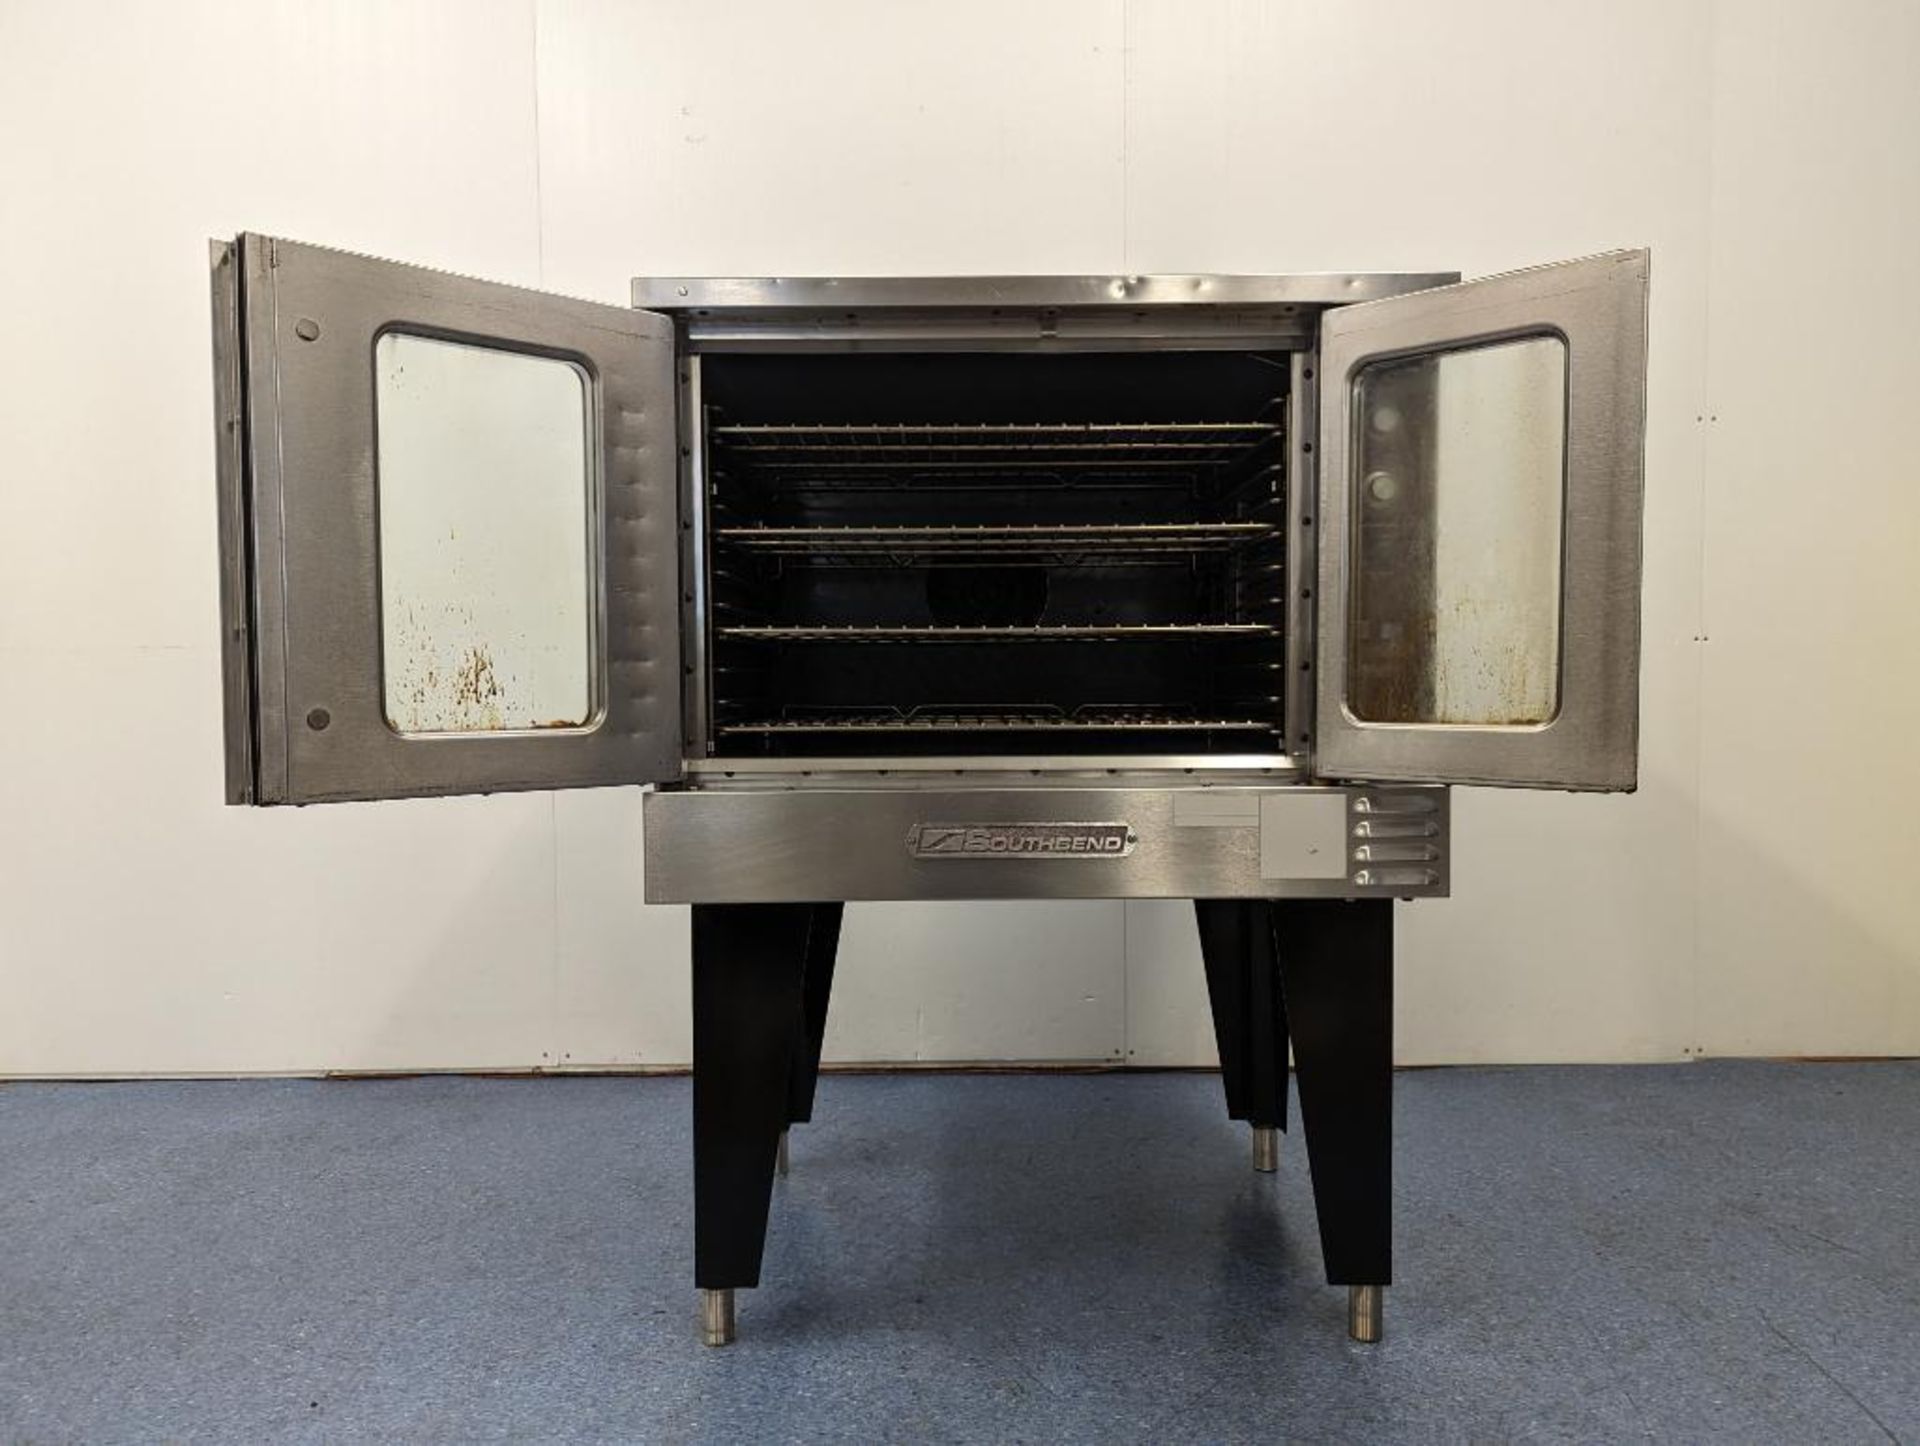 SOUTHBEND SLGS SILVERSTAR SINGLE FULL SIZE GAS CONVECTION OVEN - Image 4 of 11